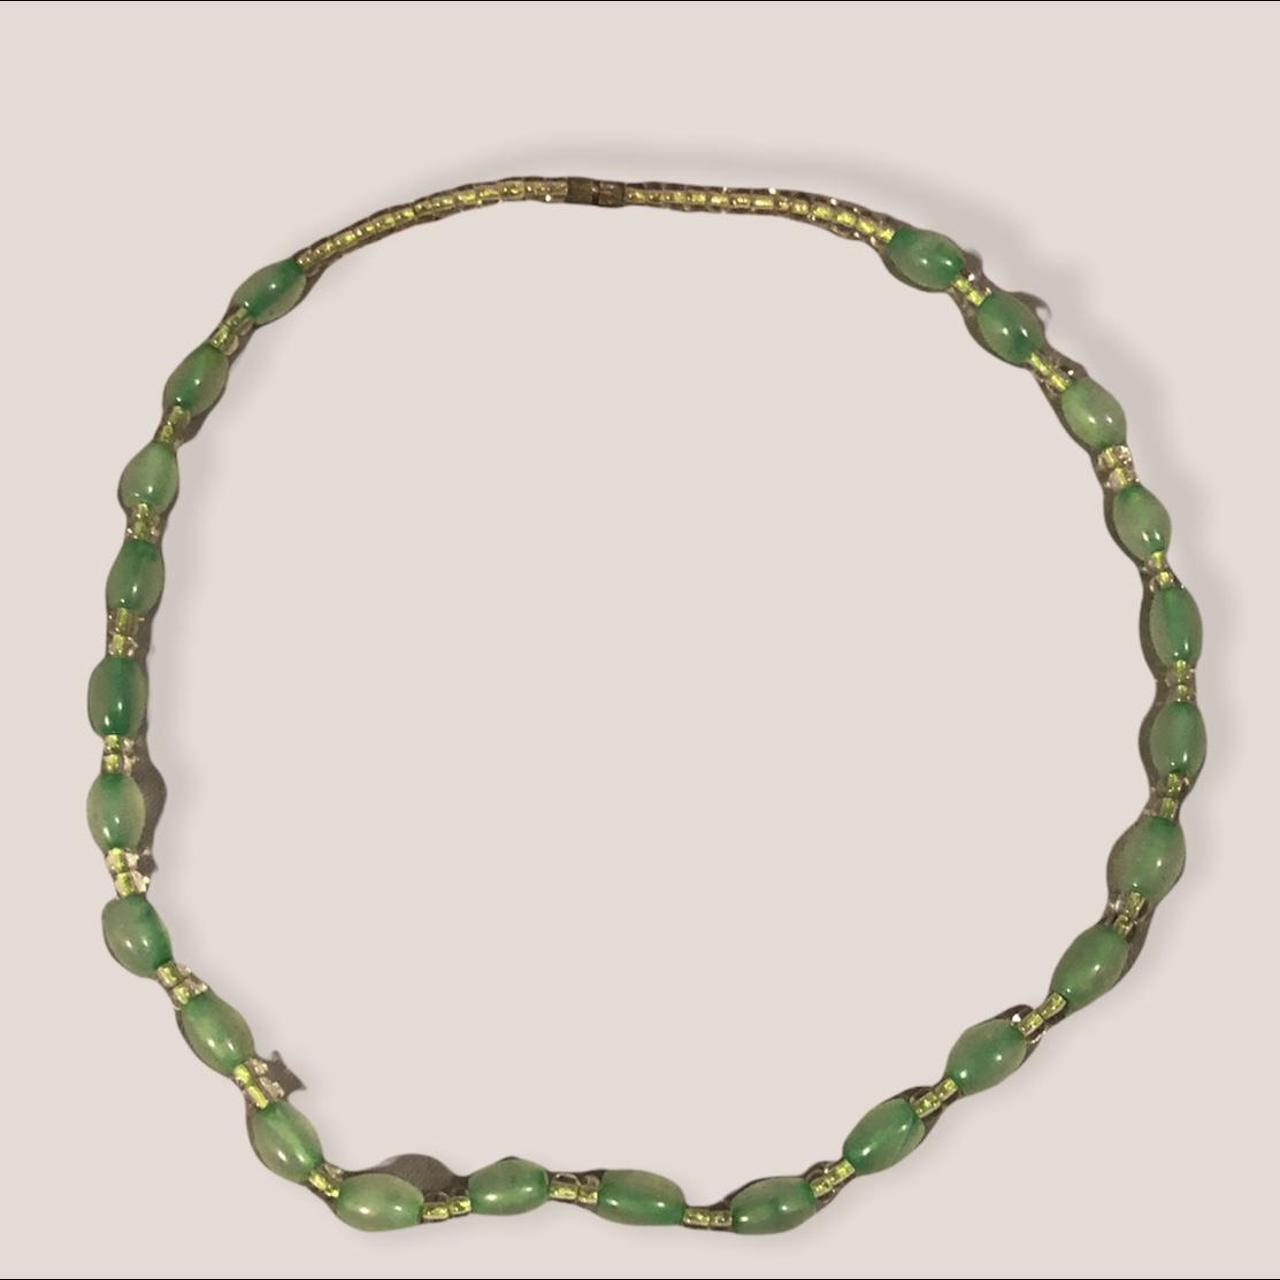 Product Image 1 - Vintage beaded jade coloured necklace